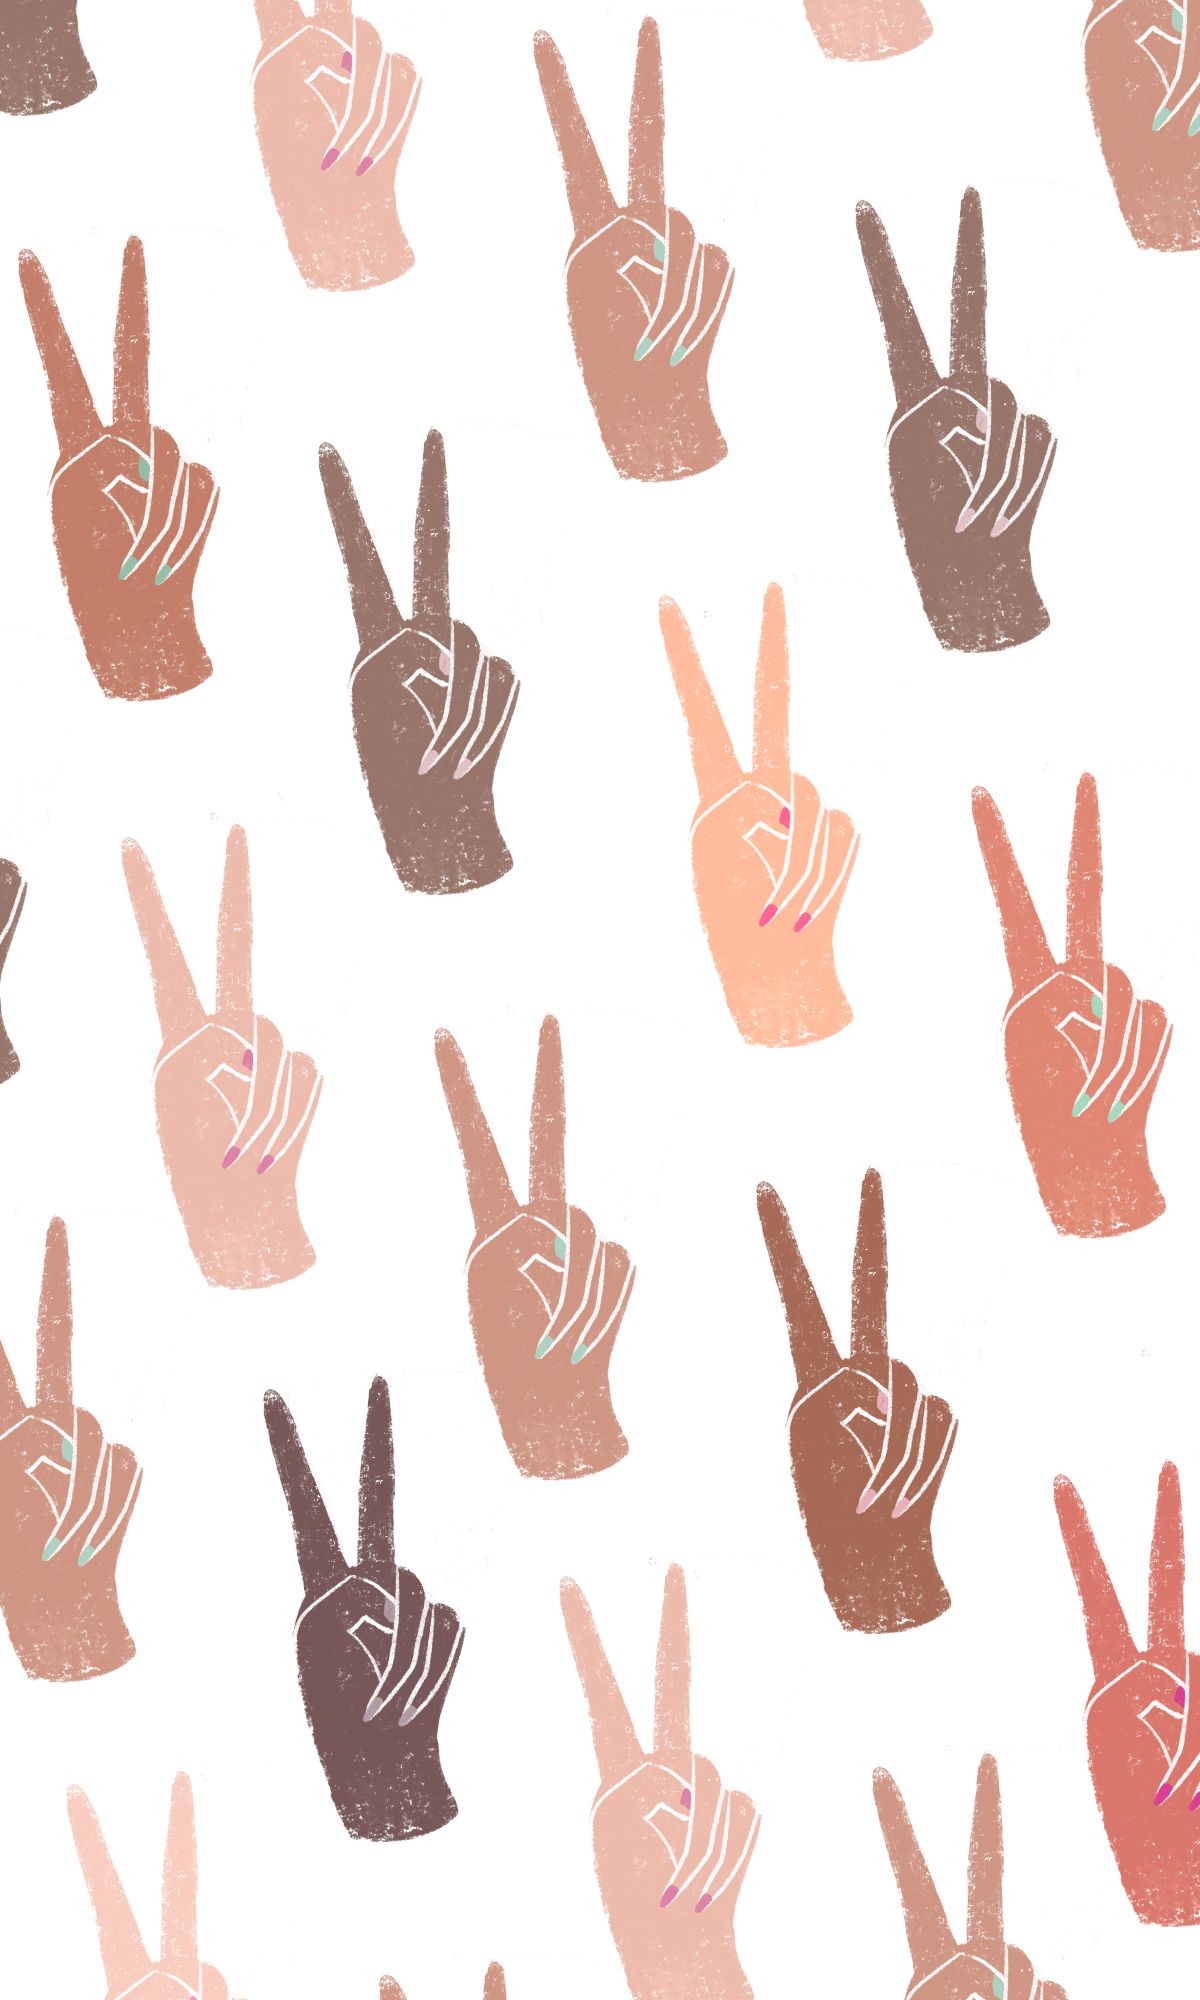 A pattern of hands making the peace sign - Peace